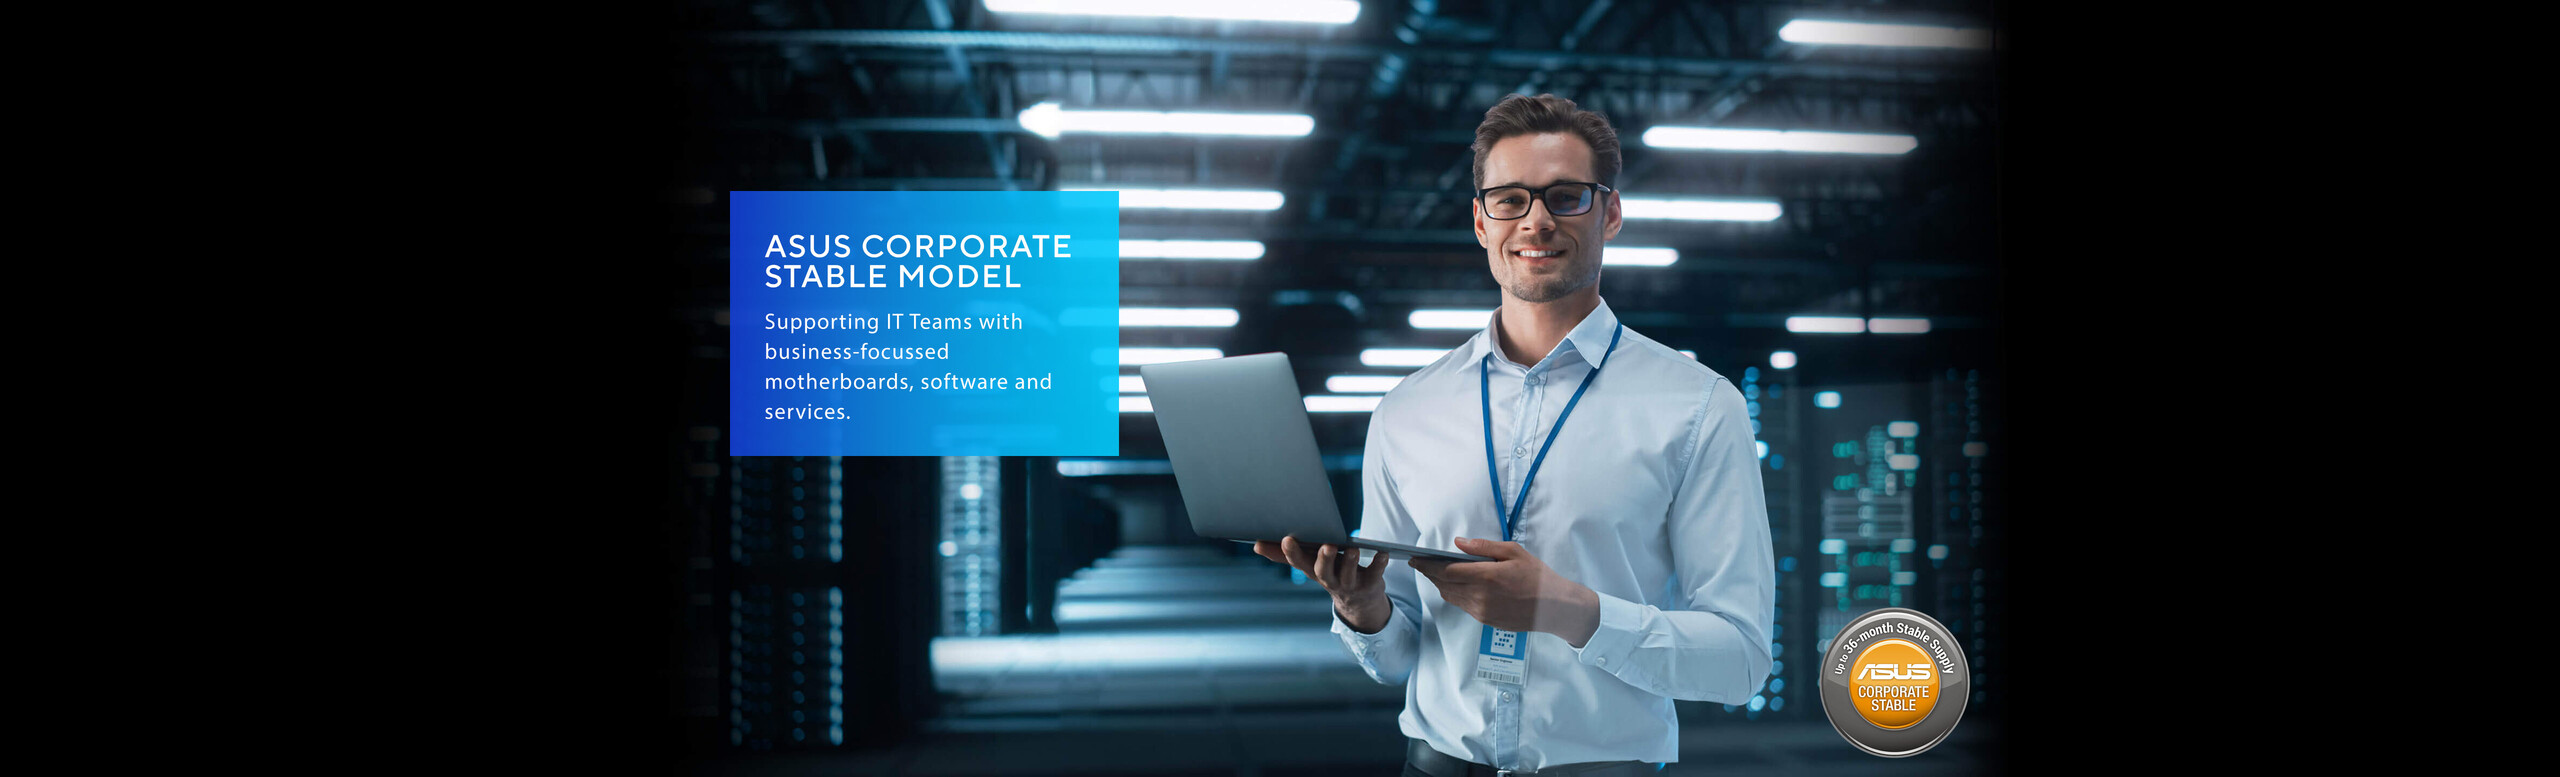 Learn more about the ASUS Corporate Stable Model